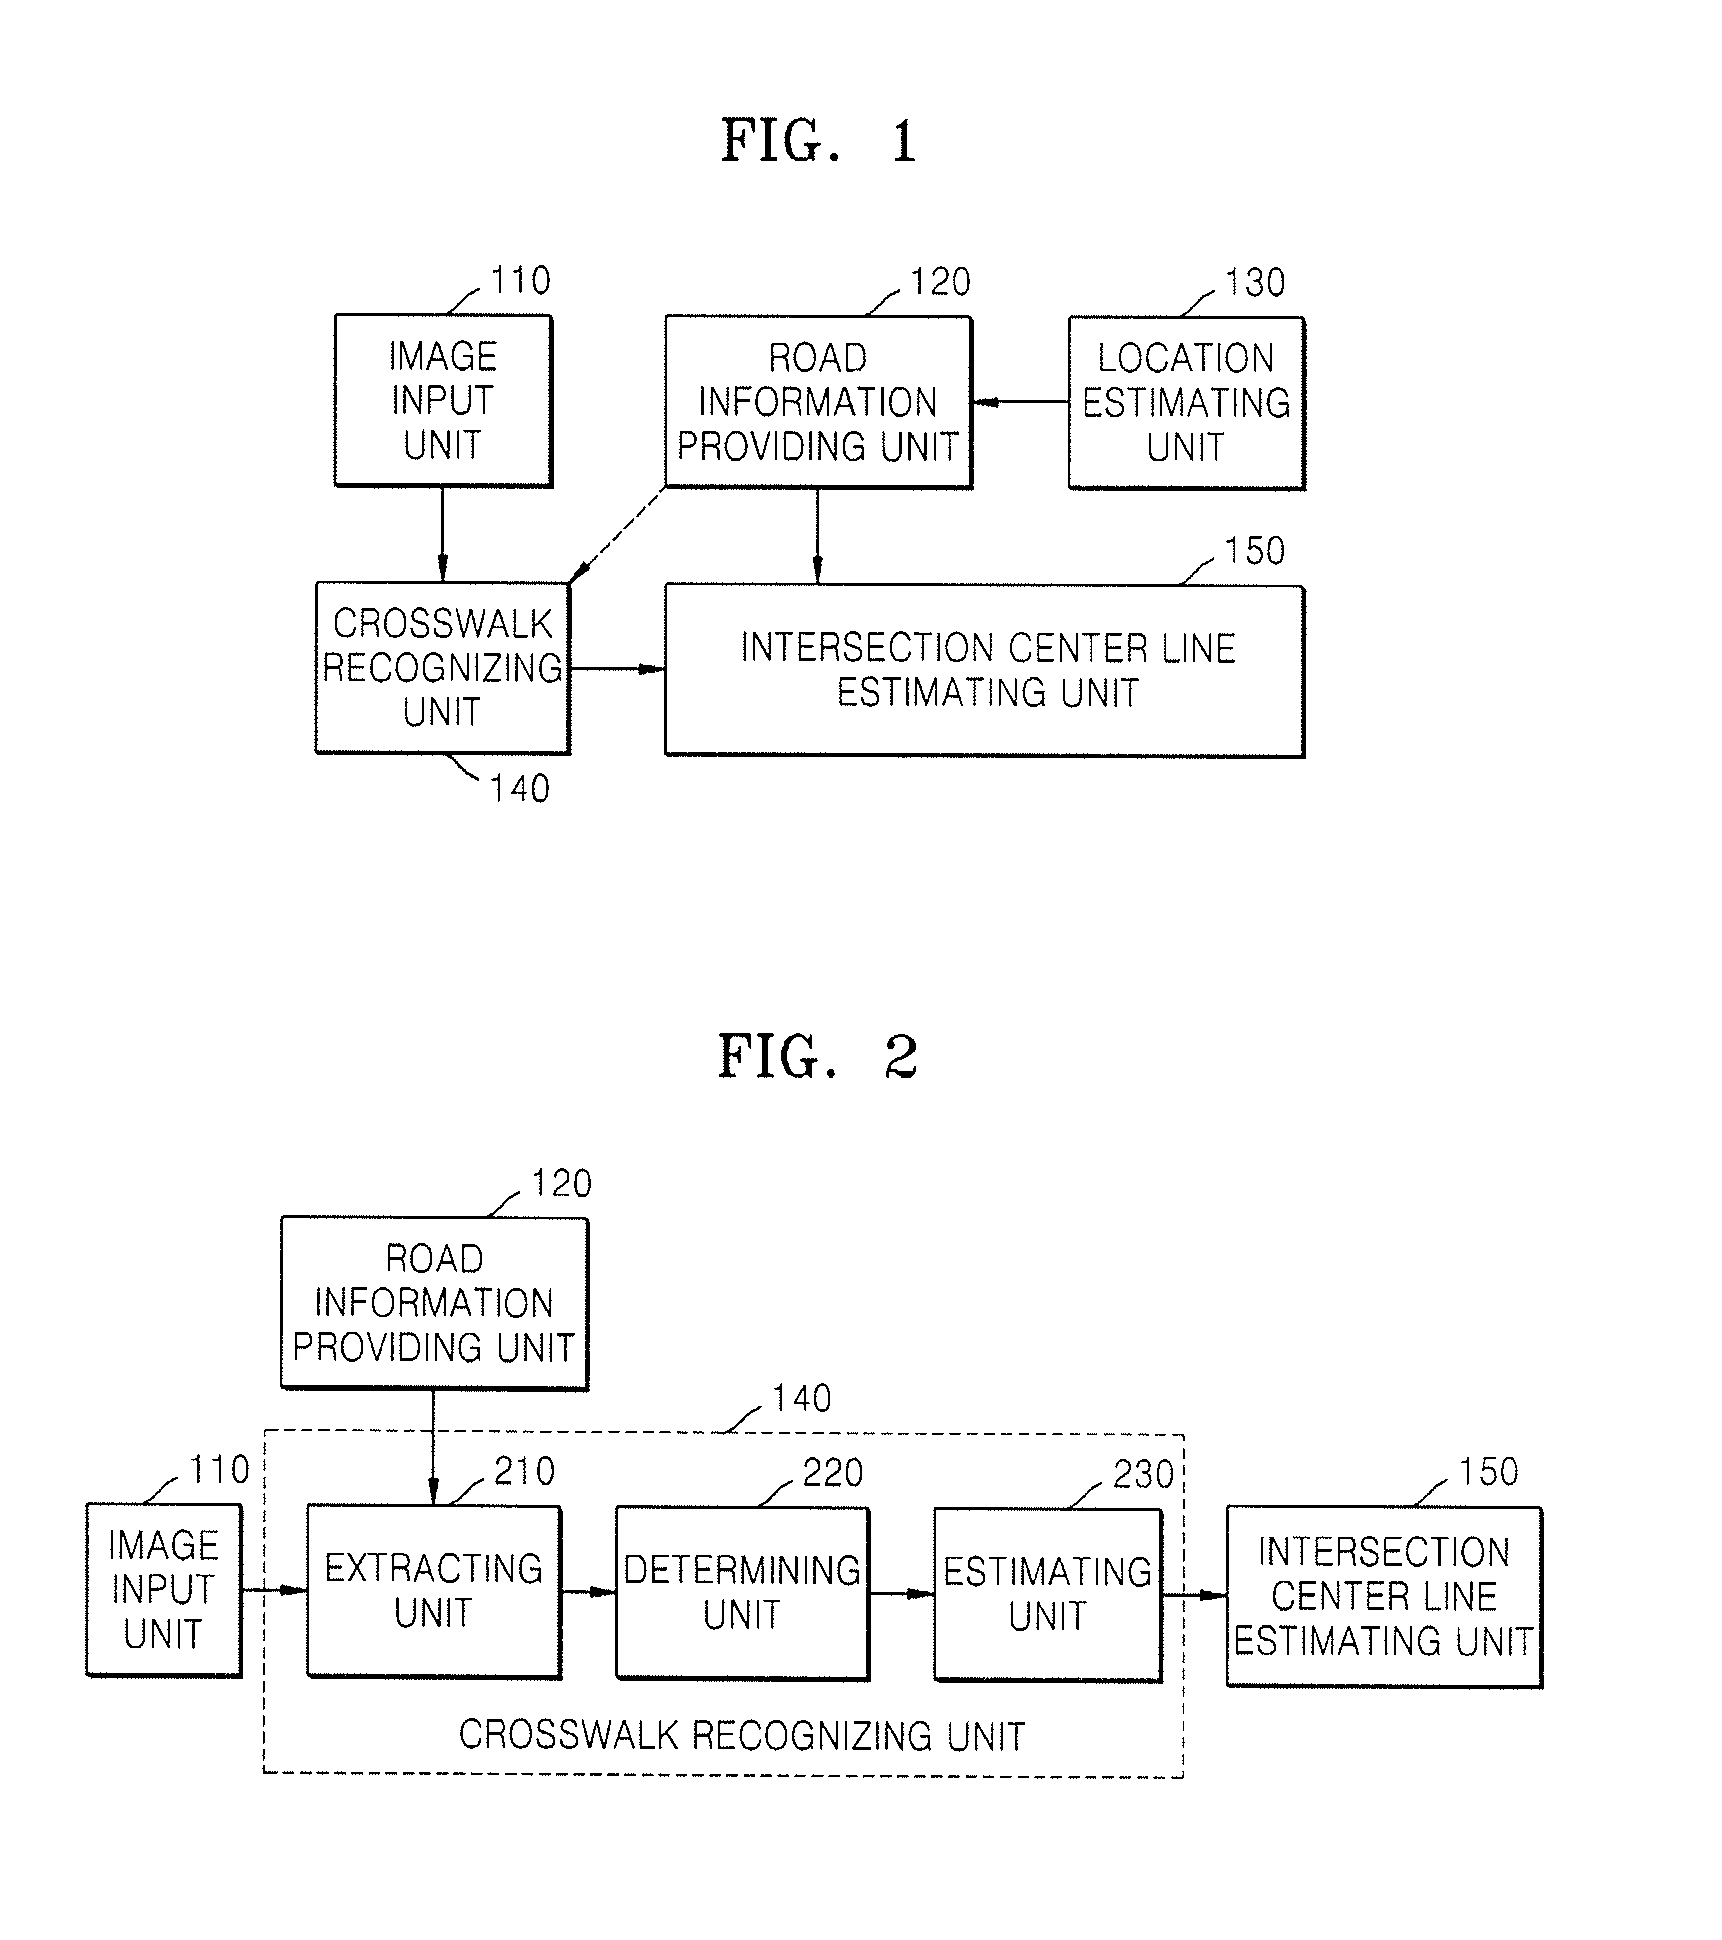 Apparatus and method of estimating center line of intersection